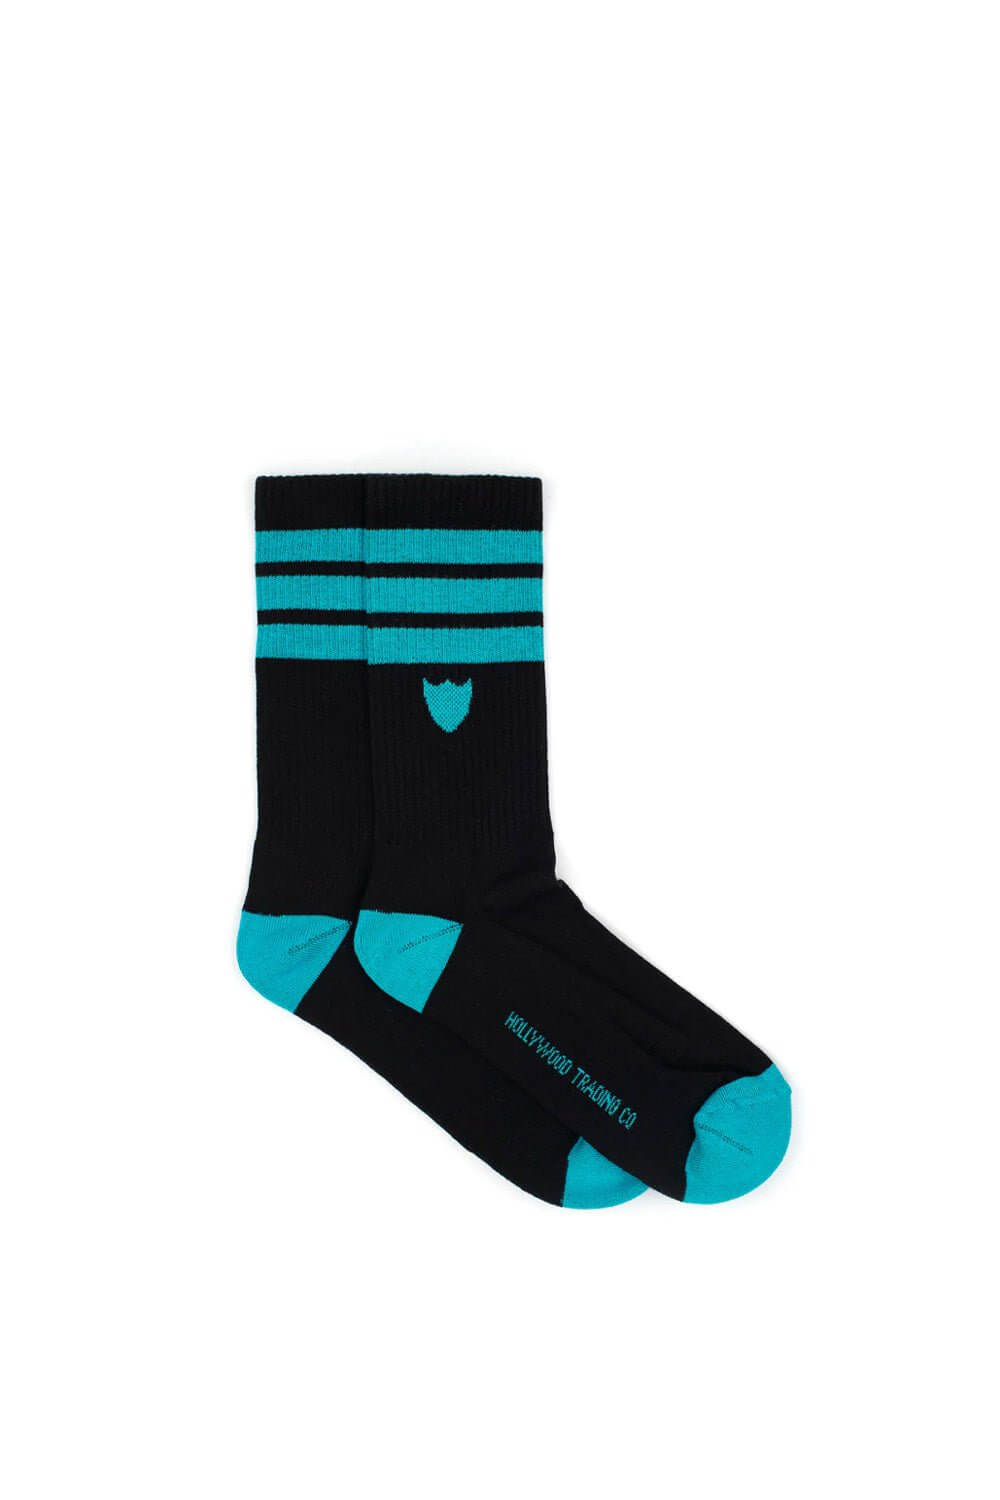 SHIELD STRIPES WOMAN SOCKS Signature woman socks with HTC shield logo. 85% Cotton 10% Polyamide 5% Elastane. Made in Italy HTC LOS ANGELES